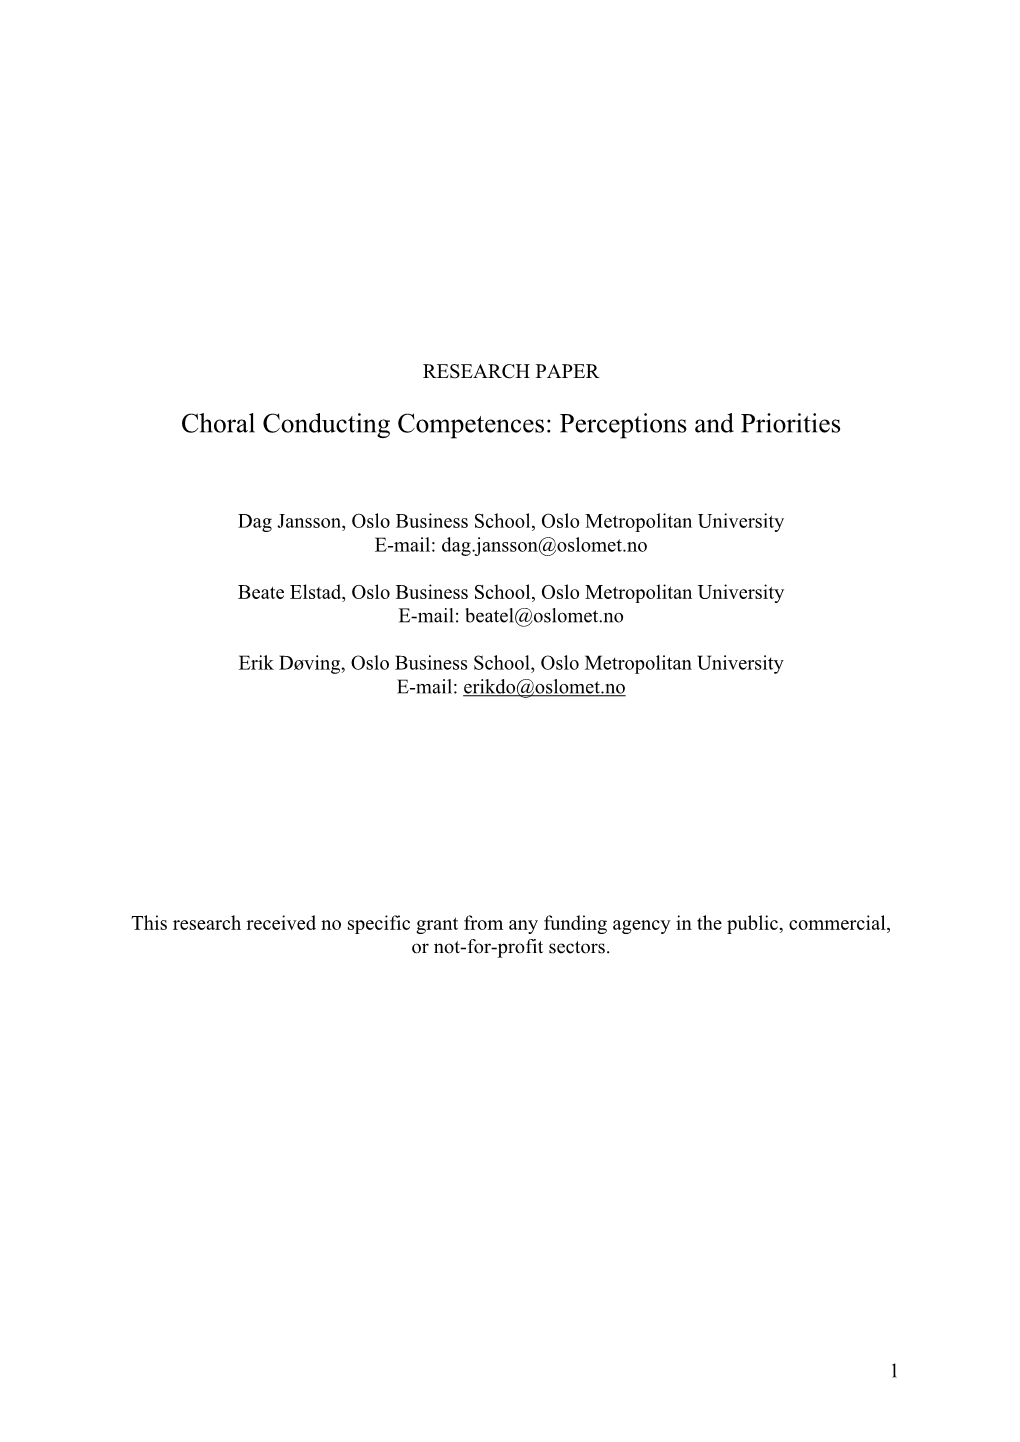 Choral Conducting Competences: Perceptions and Priorities